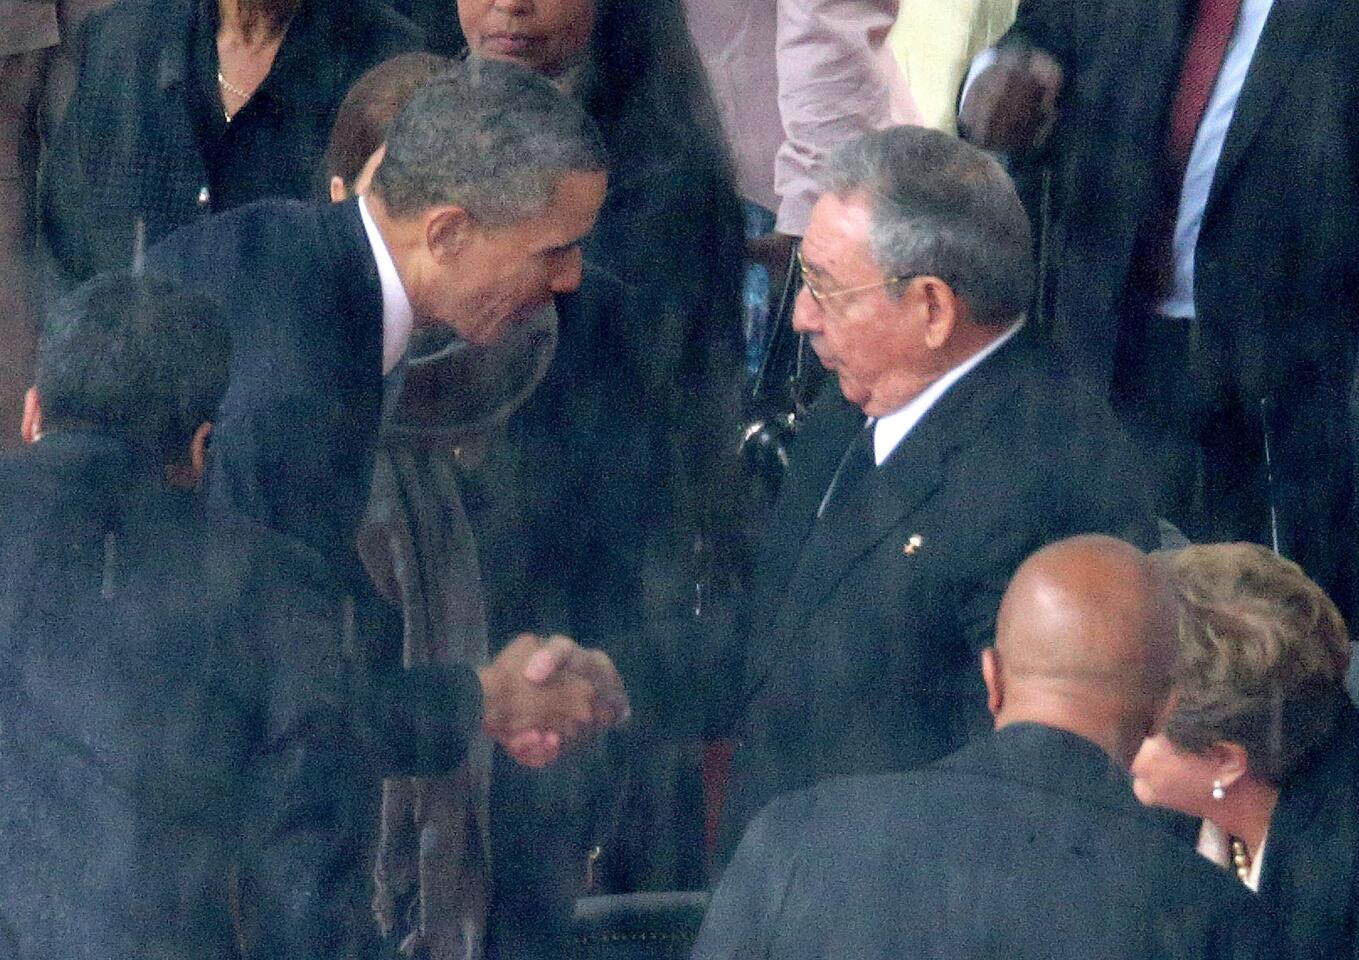 Obama shakes hands with a Castro